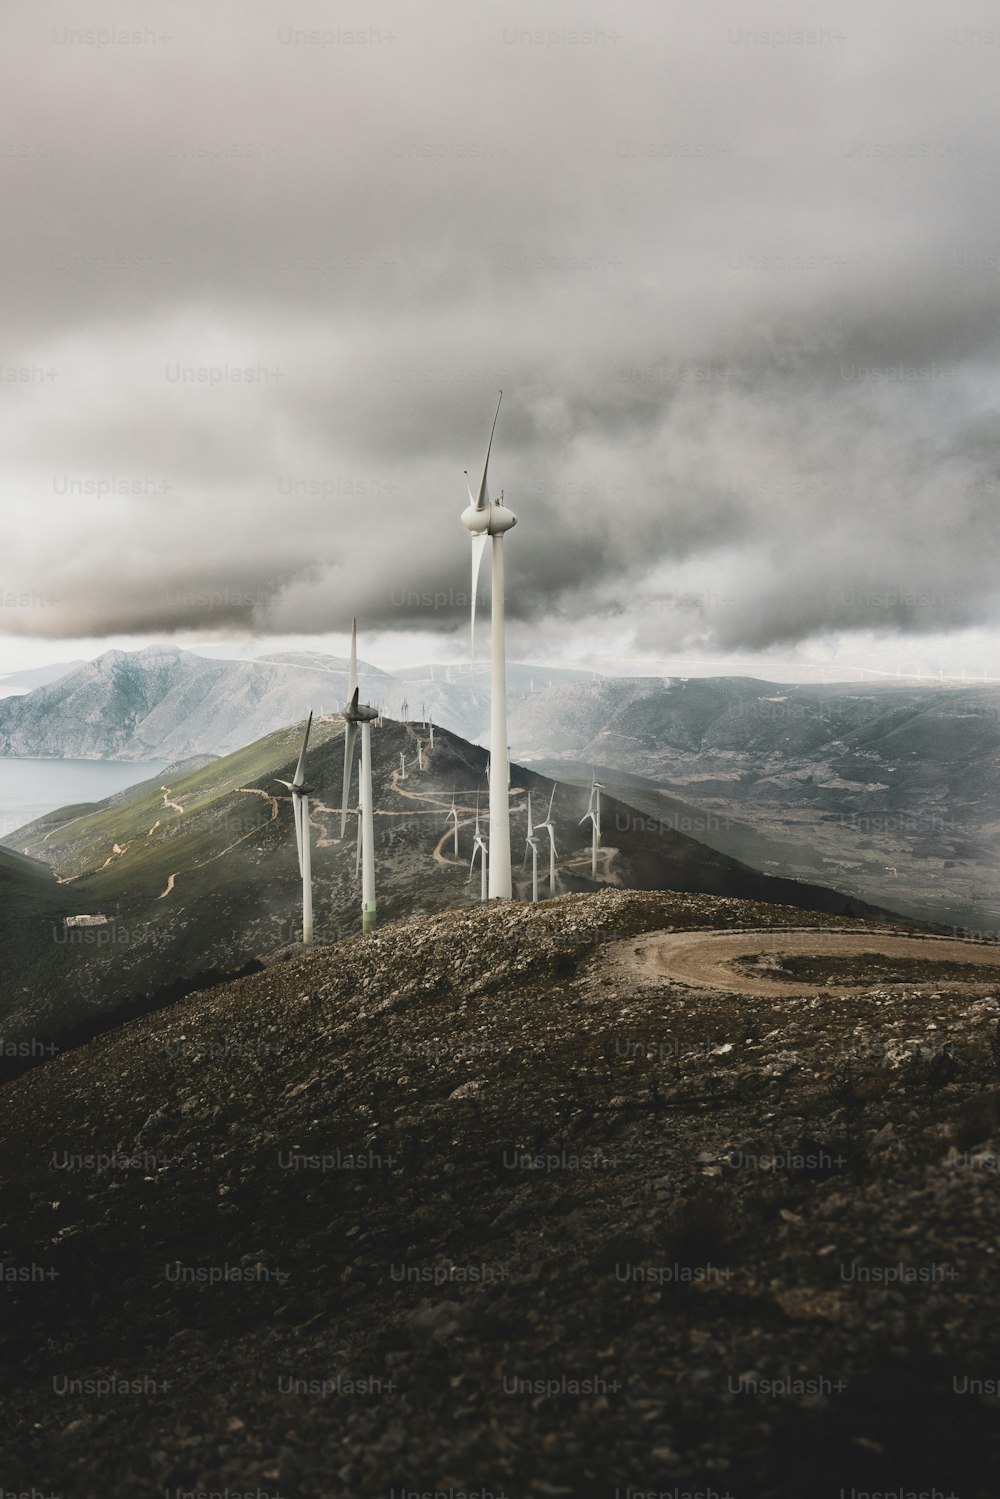 a group of windmills on a hill under a cloudy sky